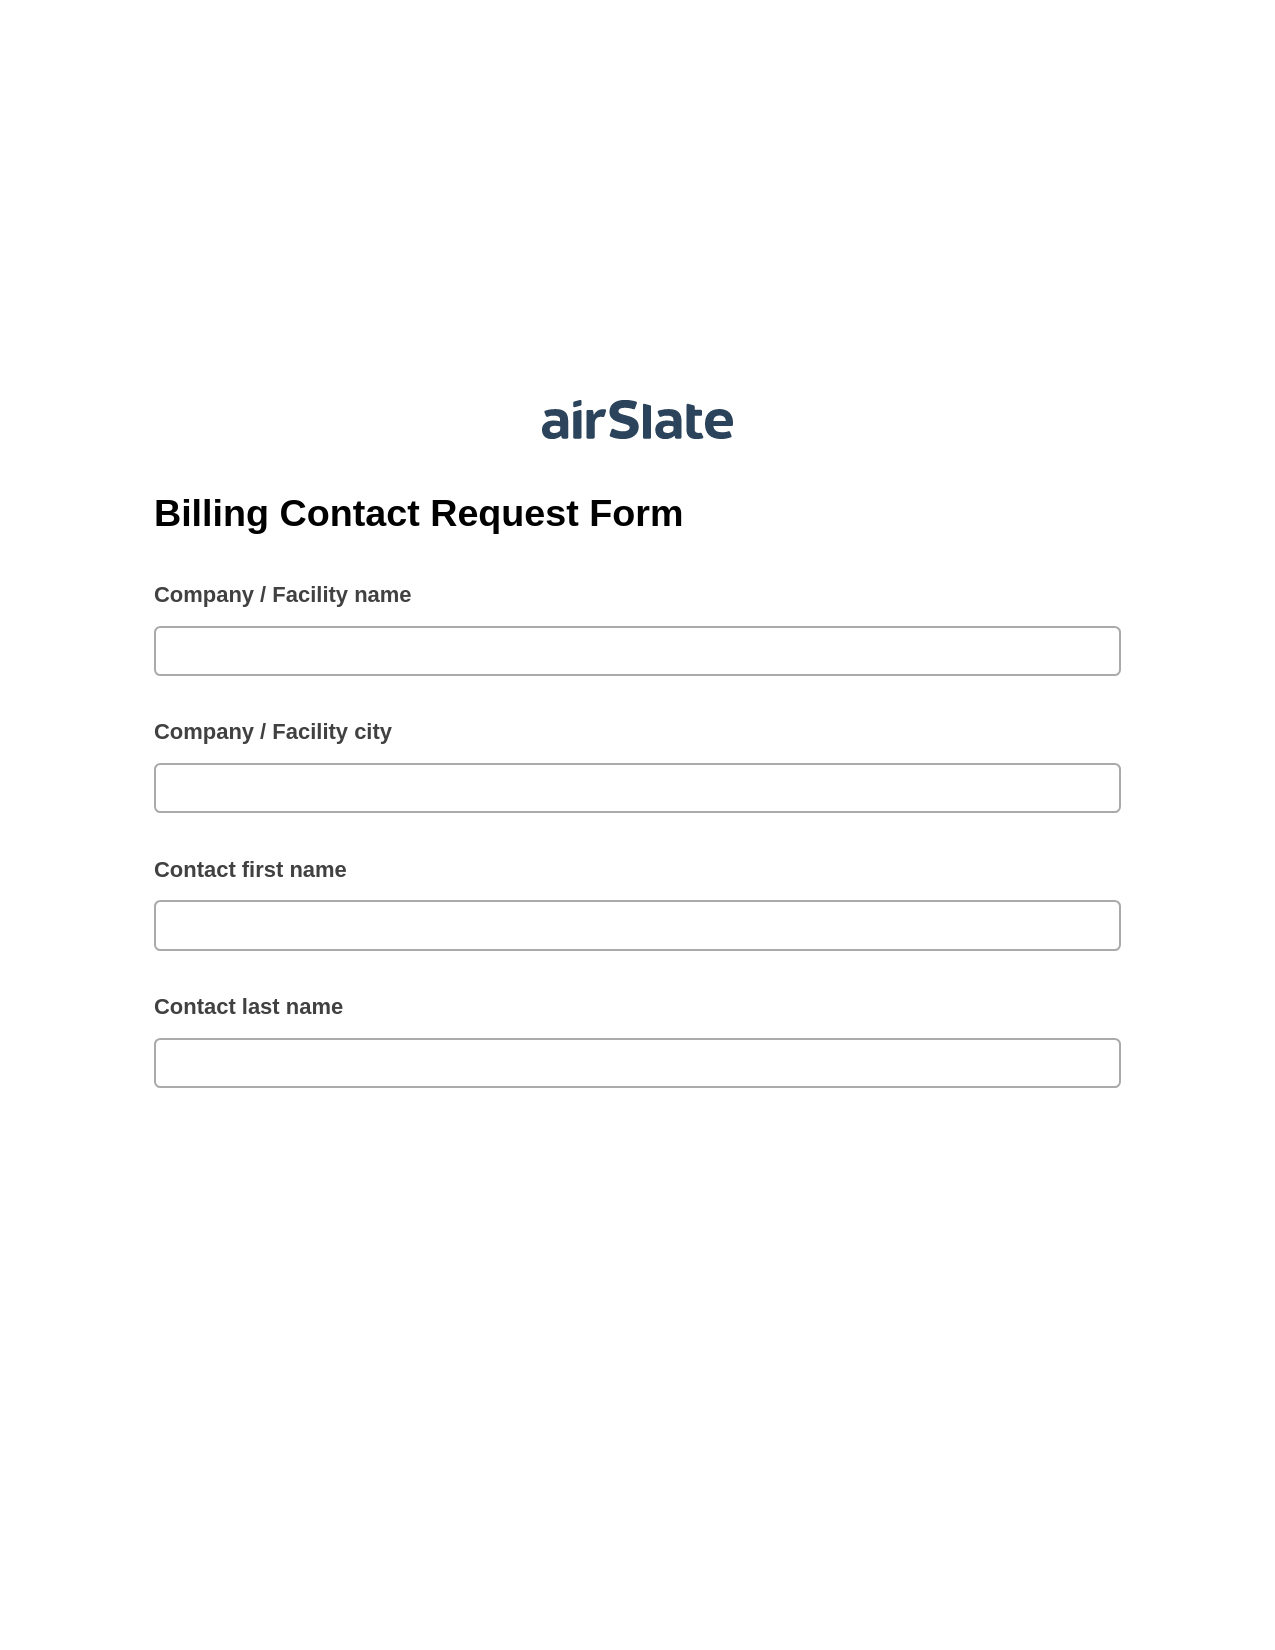 Billing Contact Request Form System Bot - Slack Two-Way Binding Bot, Assign Slate Name Bot, Archive to SharePoint Folder Bot